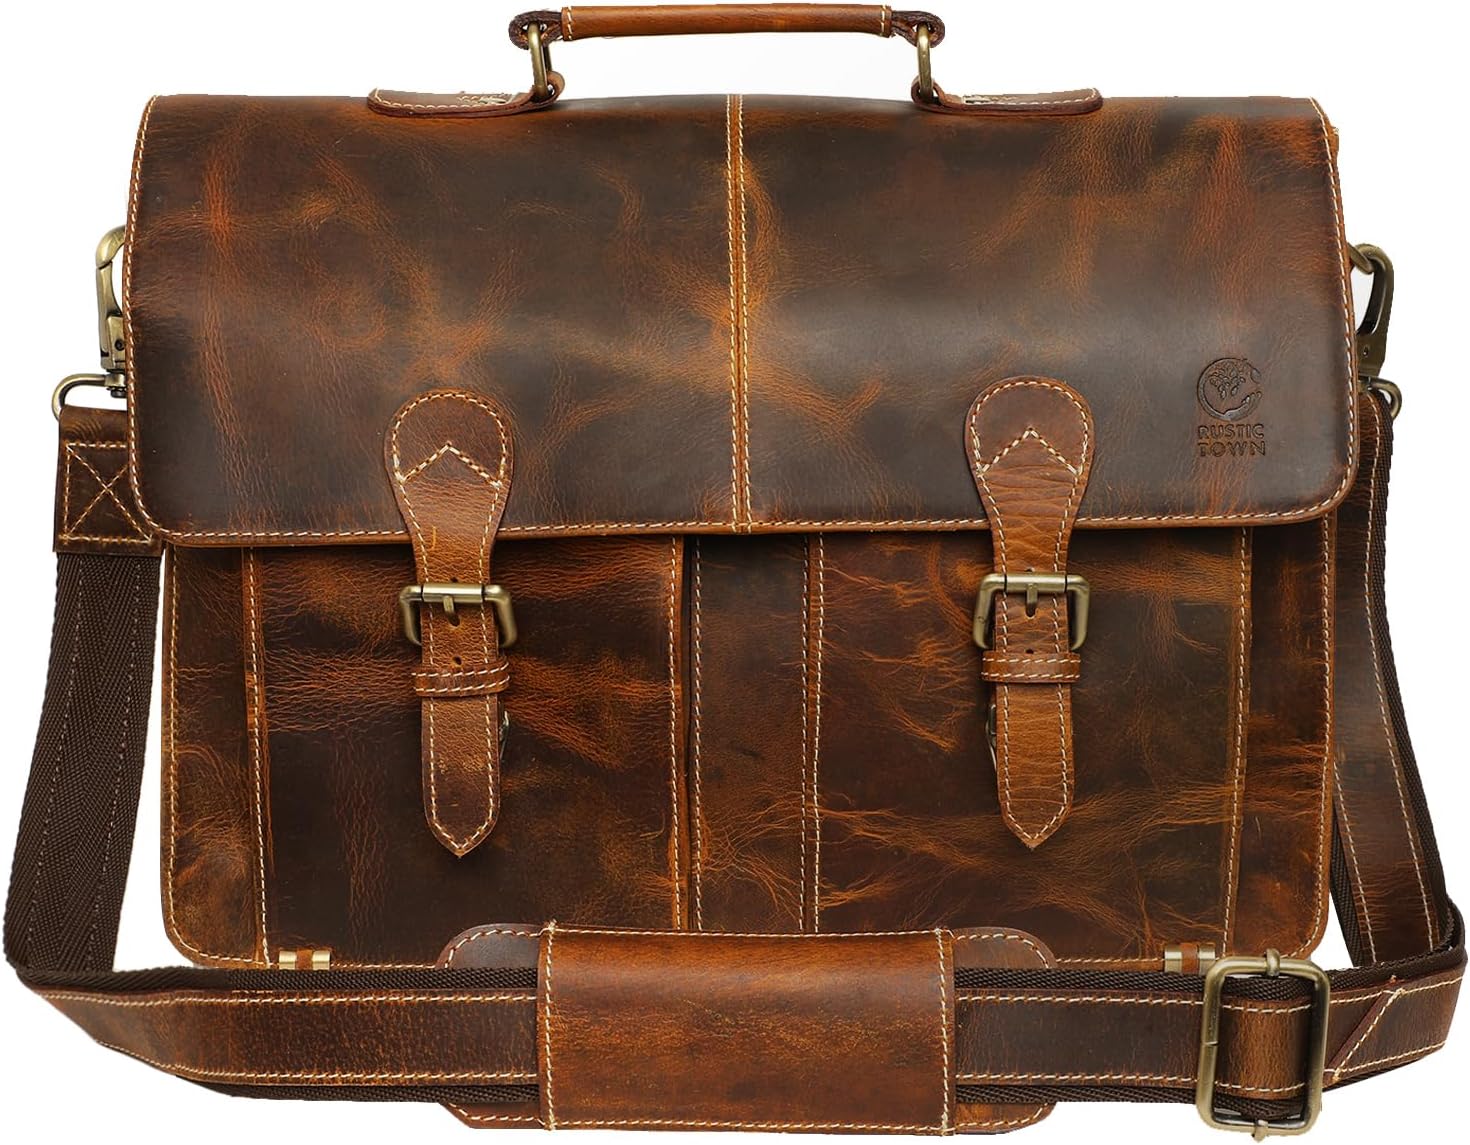 Comparing 5 Exceptional Men’s Leather Laptop Bags